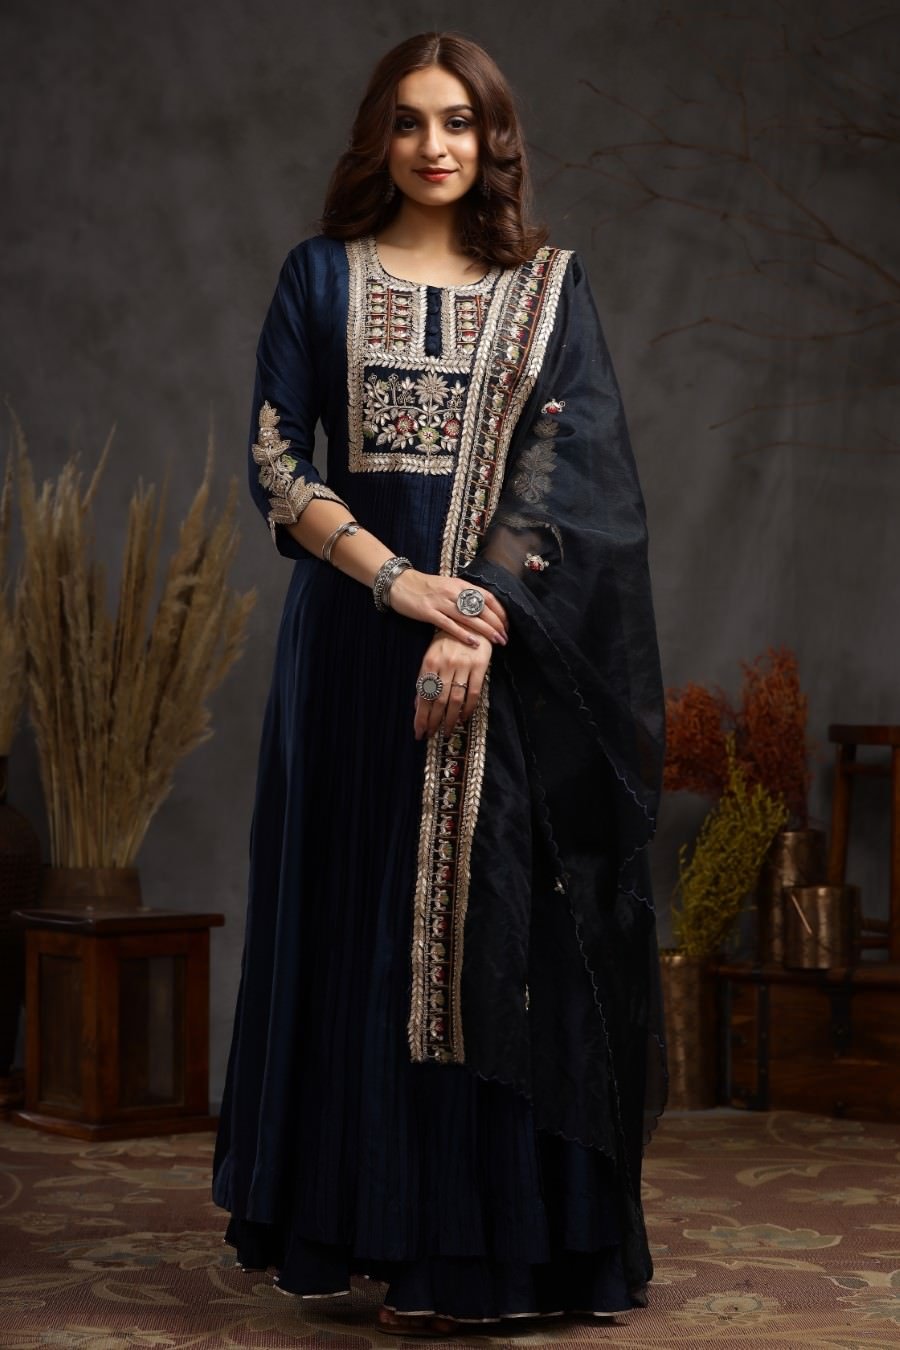 Navy blue Modal Silk Long Enkle Length Stylish Dress And Dupatta With Embroidery